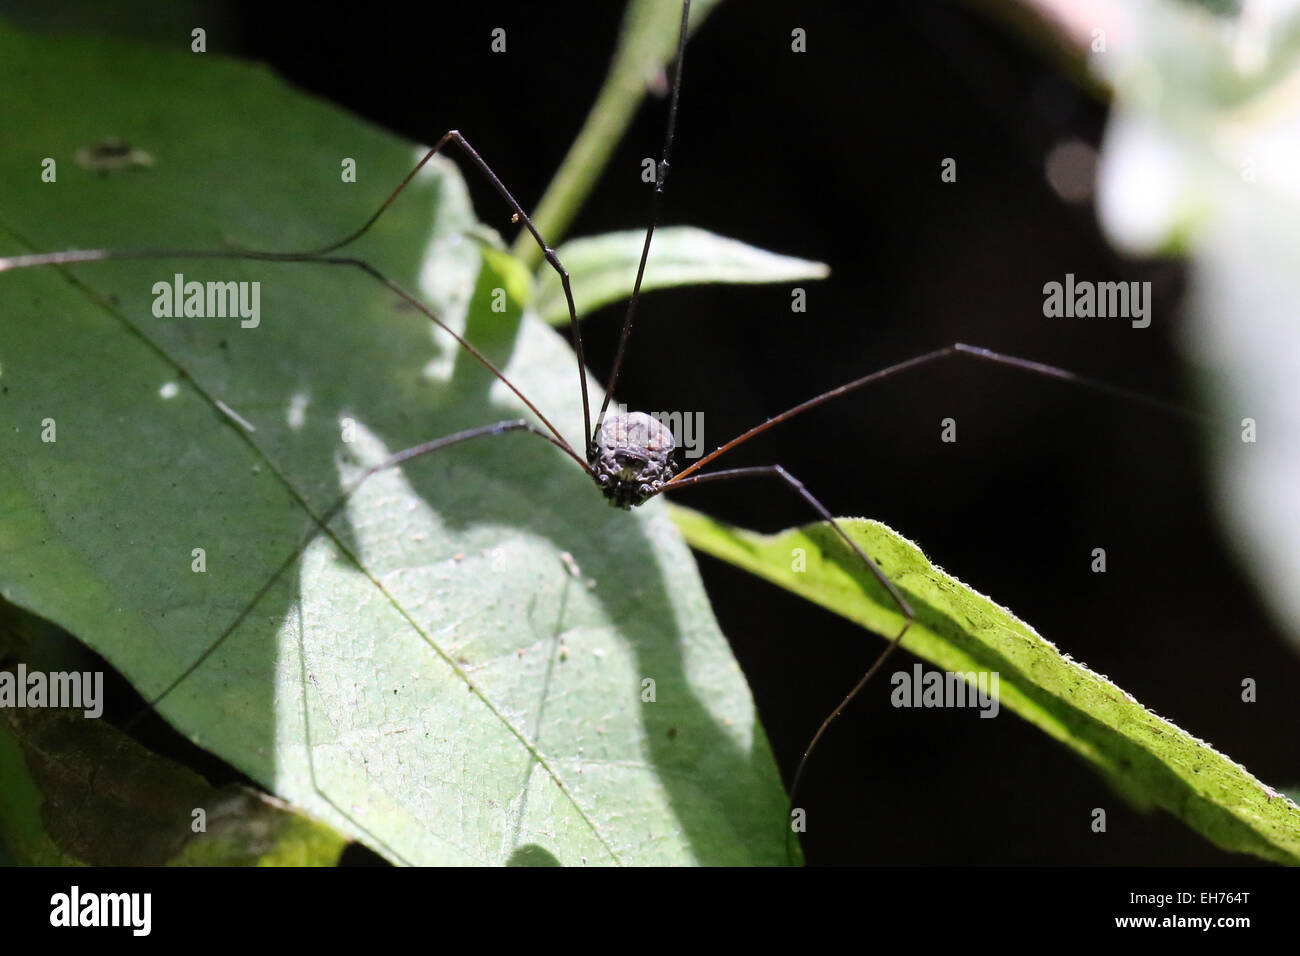 Spider long legs in the wild. Stock Photo